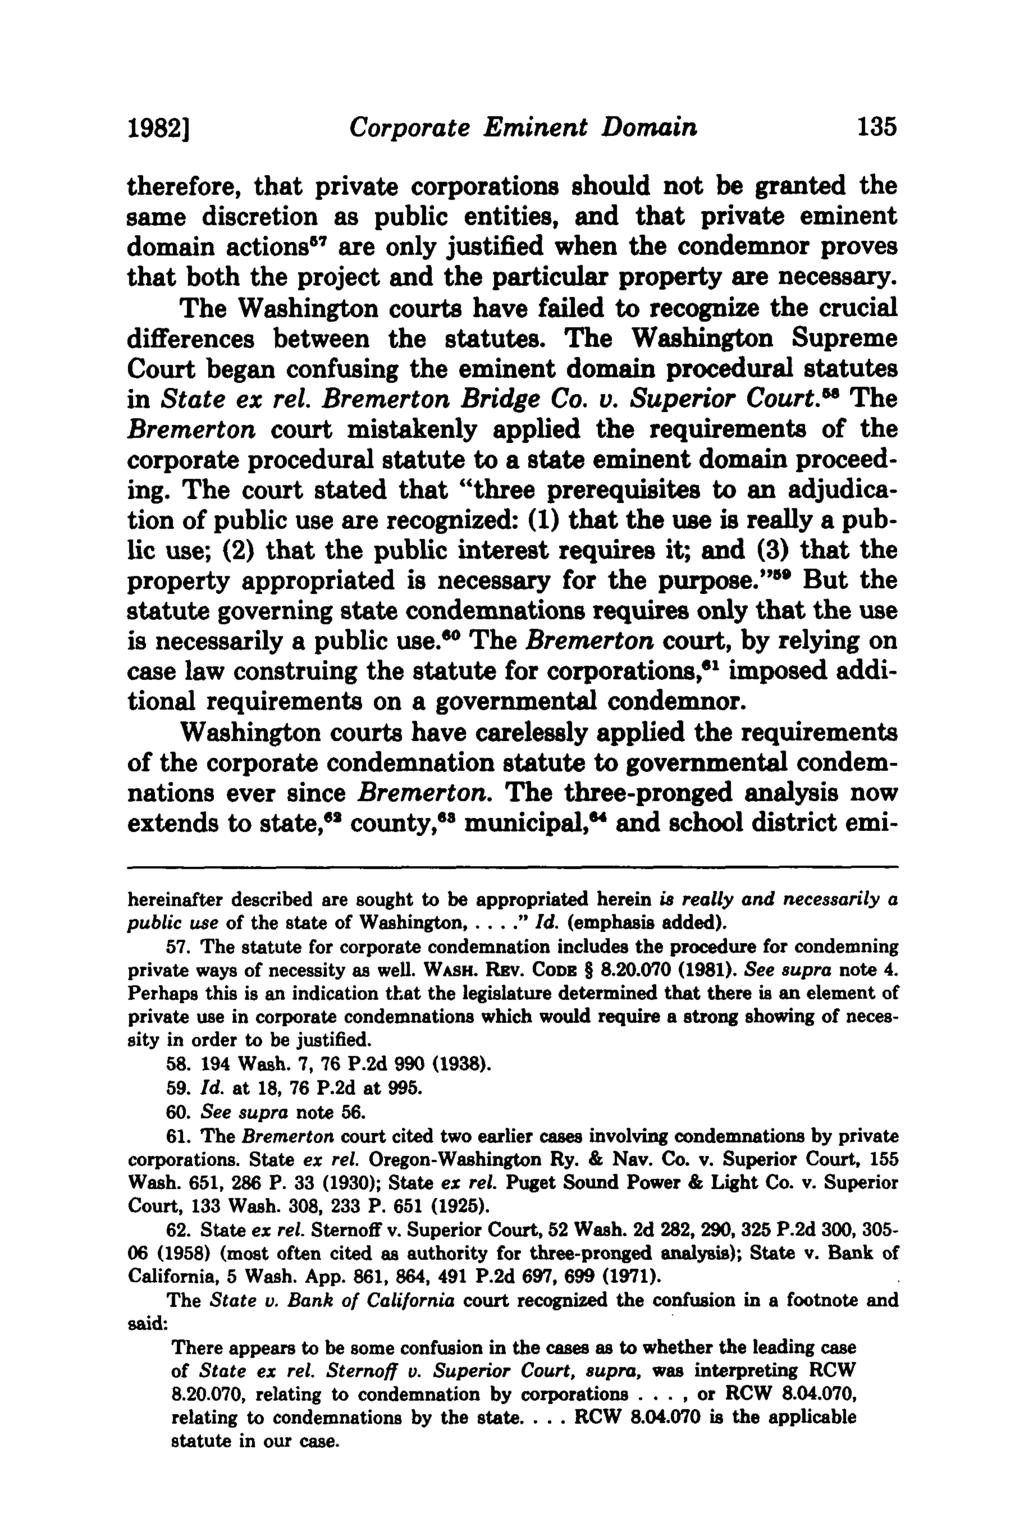 1982] Corporate Eminent Domain therefore, that private corporations should not be granted the same discretion as public entities, and that private eminent domain actions 6 " are only justified when